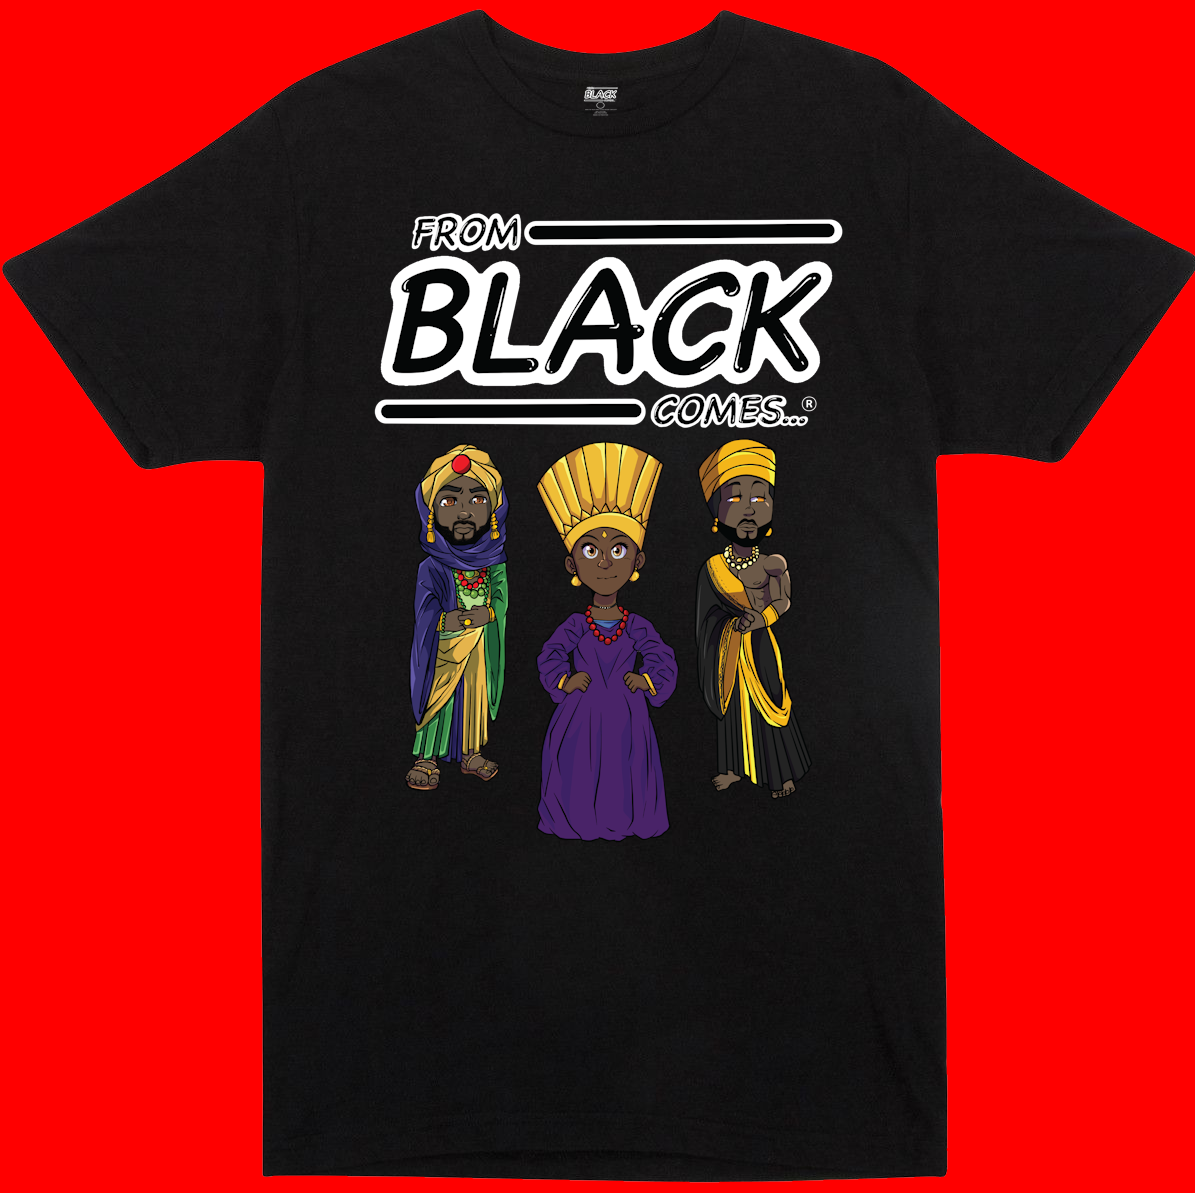 From Black Comes® Royalty Youth T-Shirt